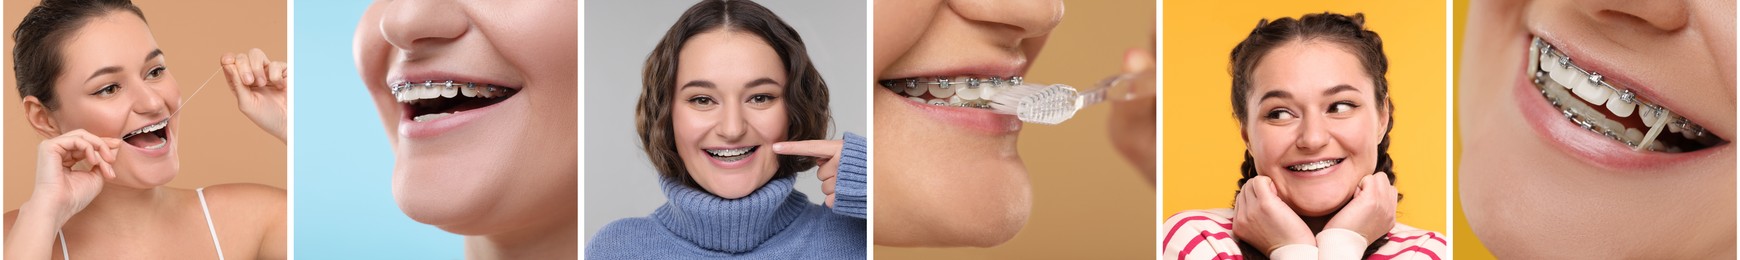 Image of Girl wearing braces on different colors backgrounds, collage of photos